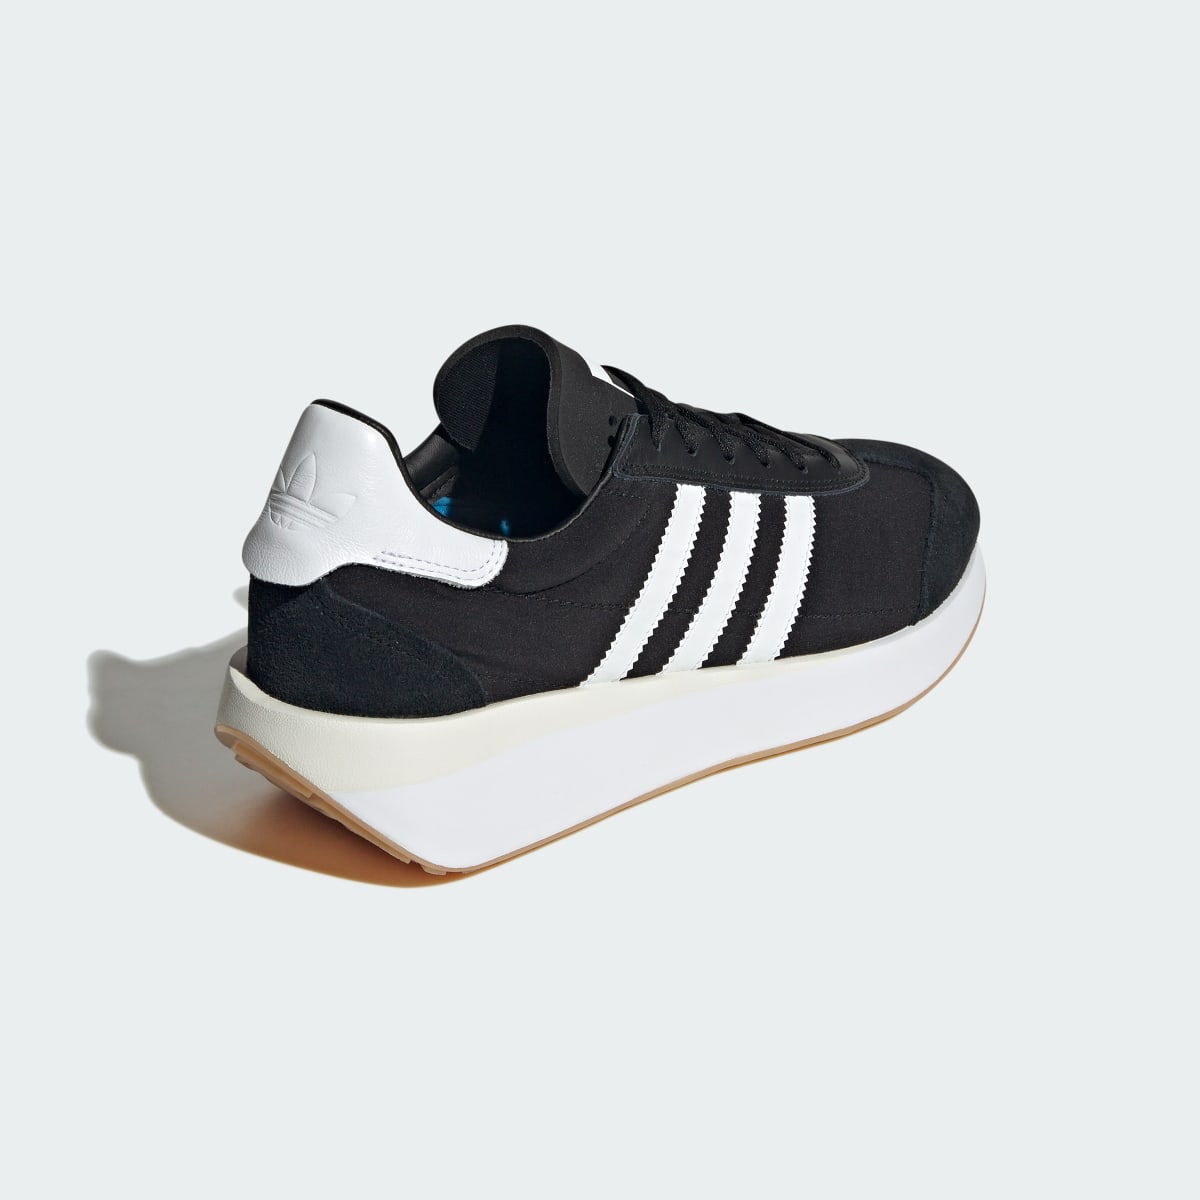 Adidas Chaussure Country XLG. 5